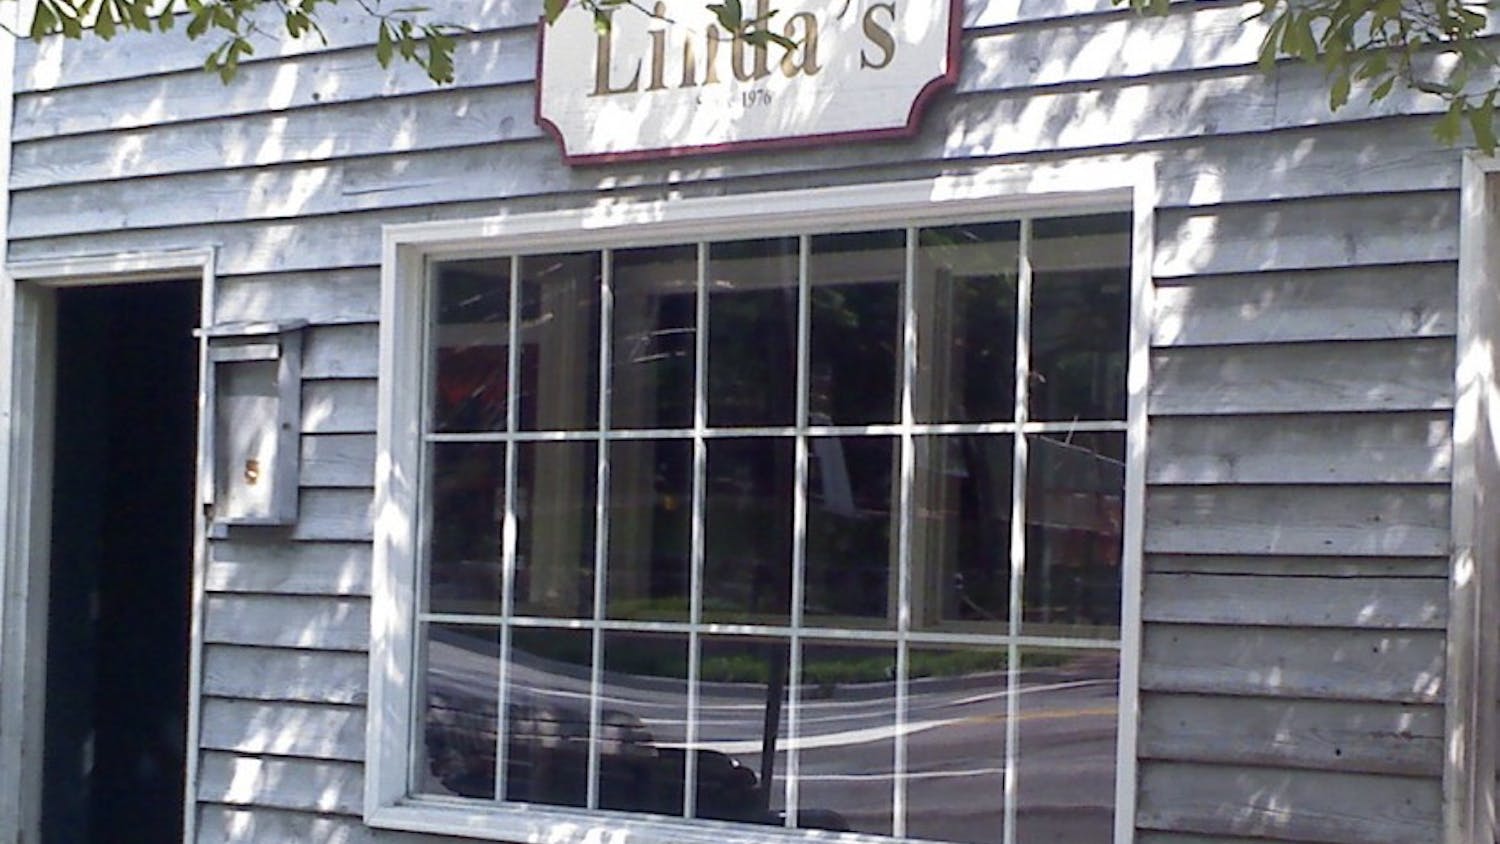 Linda’s is in a good starting location to head home from after a night’s out.